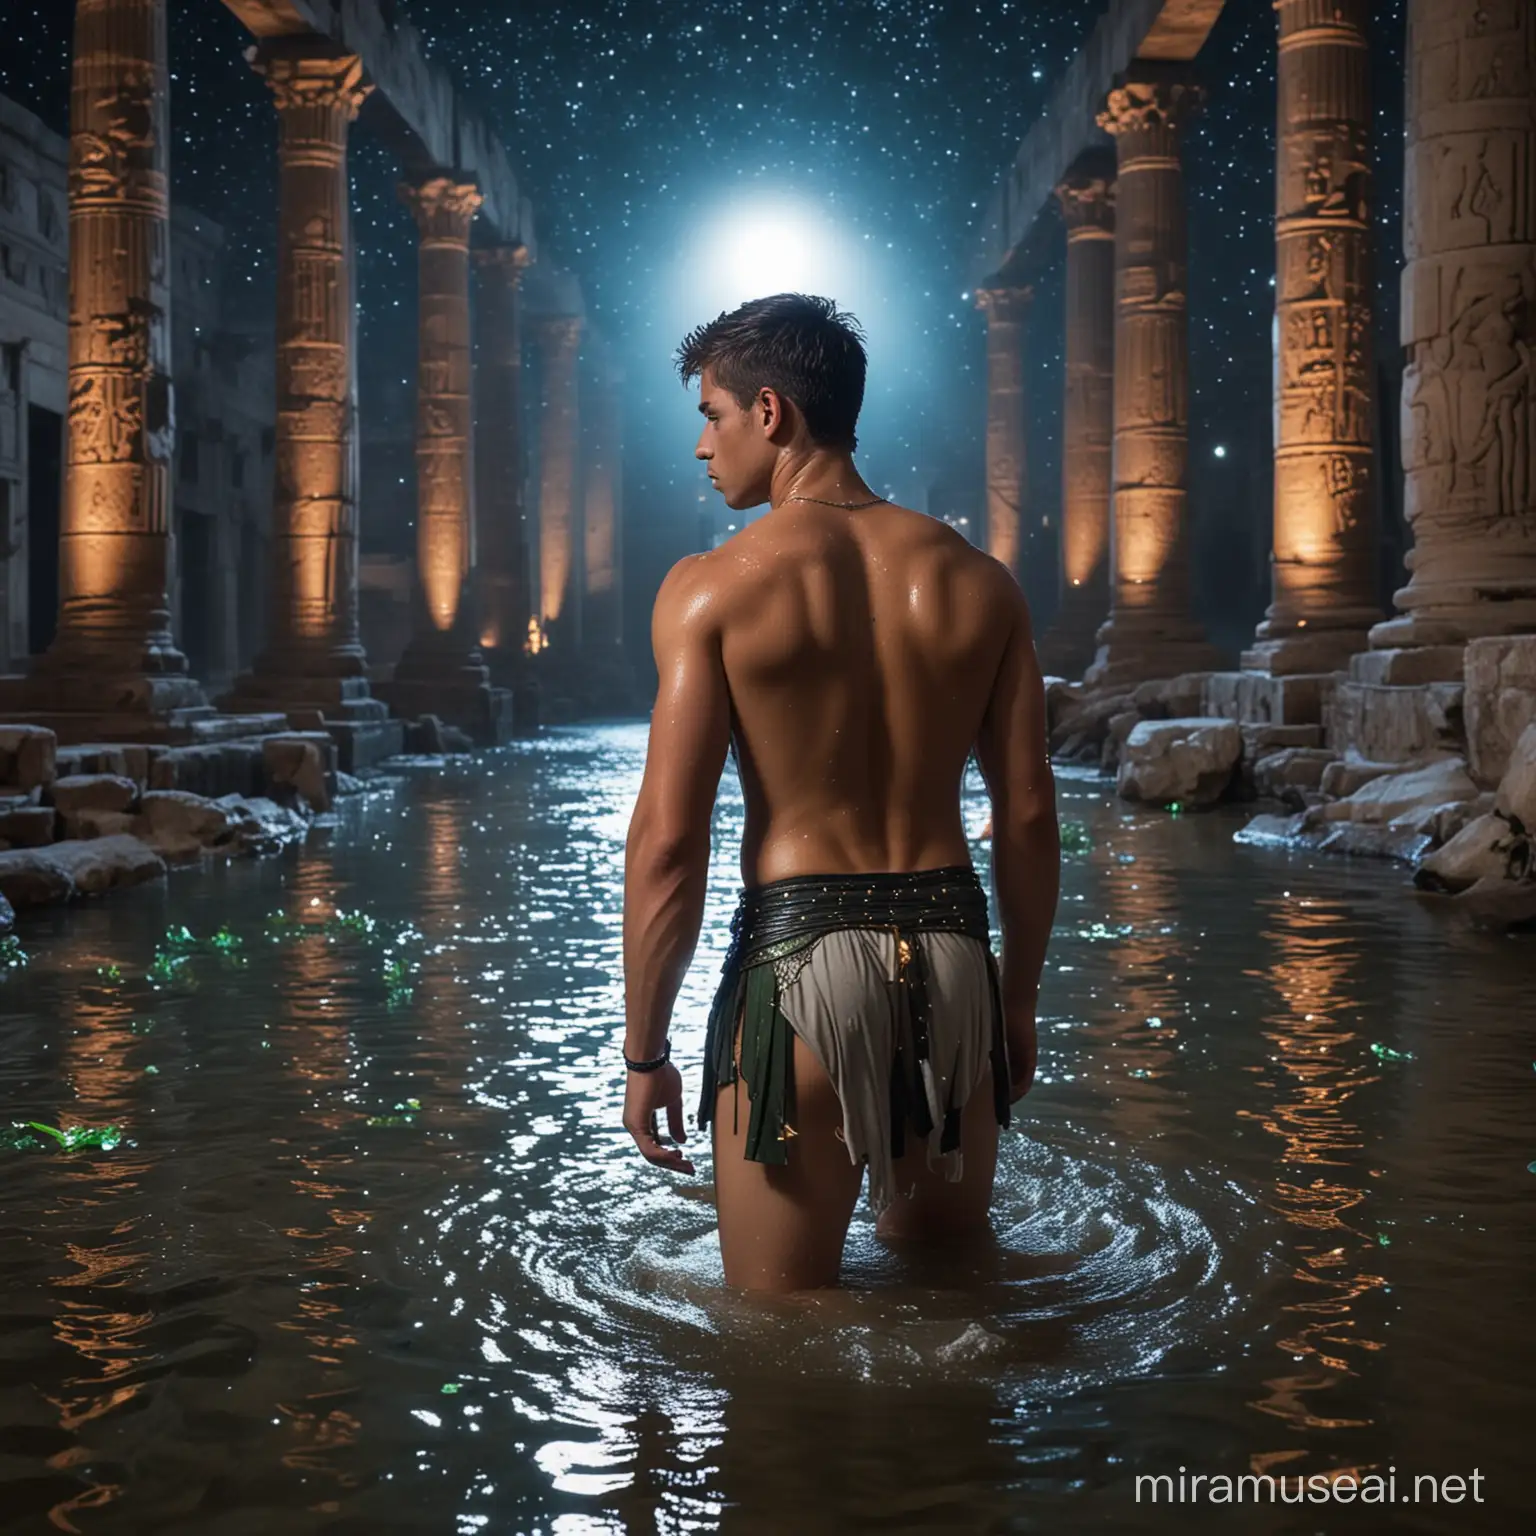 Seen from behind. Sexy sweaty wet muscular young teen boy with shaved hairdress with green eyes tanned skin, crouching wit his feet in the water of an oasis. Dressed as a roman soldier shirtless. In the ruins of a egyptian temple. At night. The sky is full of stars with a huge galaxy. Blue neon colors ambient.